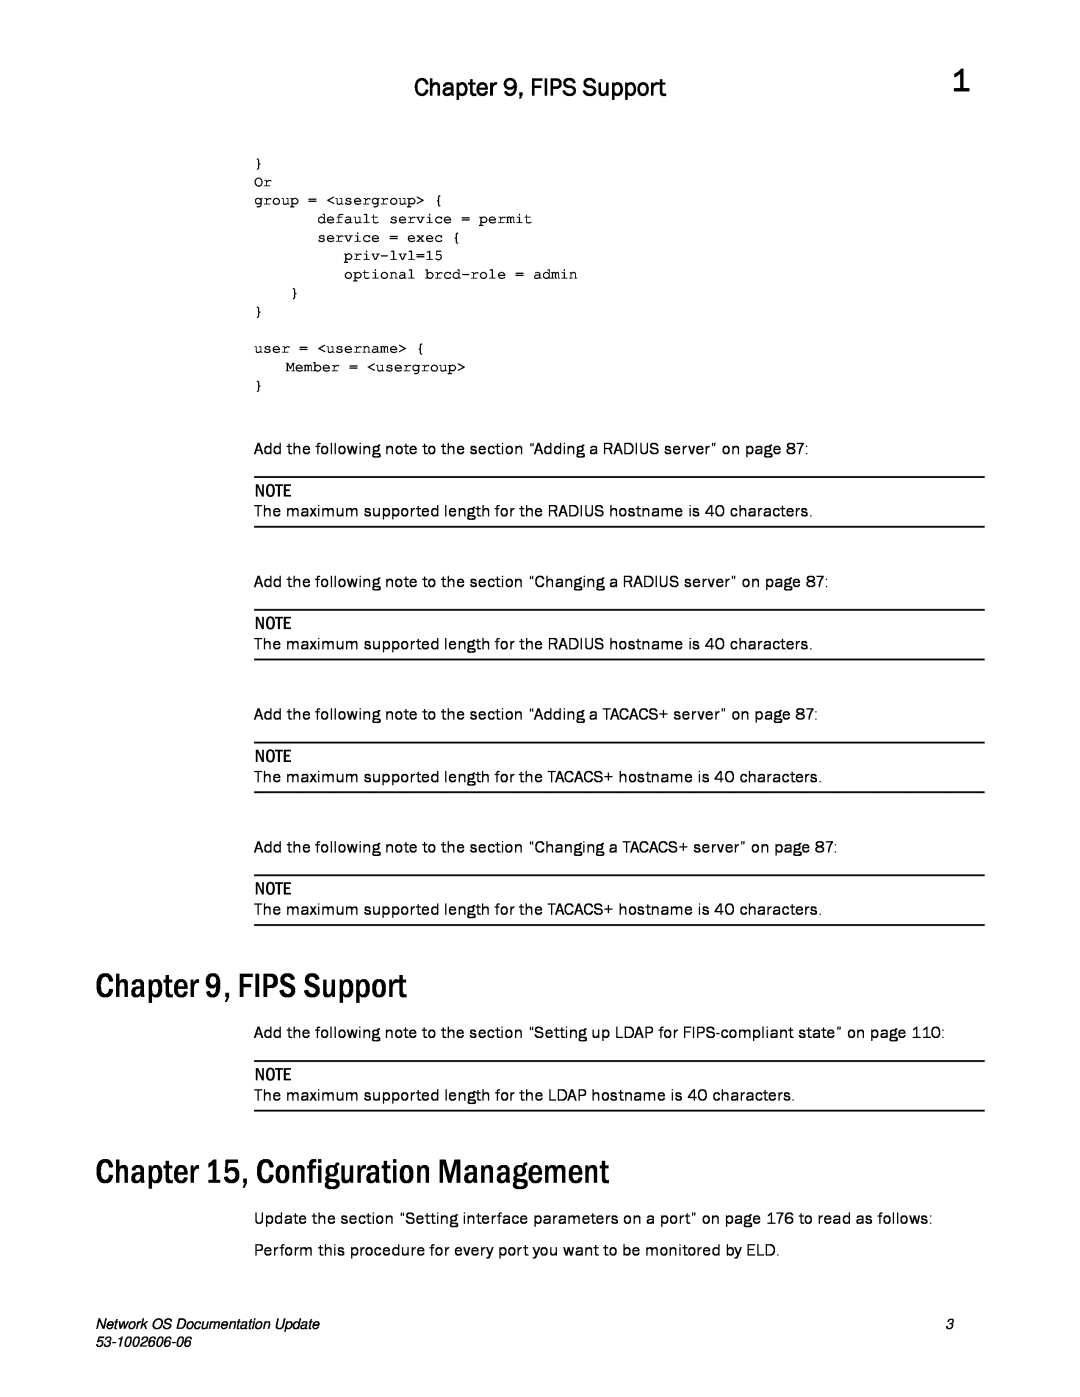 Brocade Communications Systems 2.1 manual FIPS Support, Configuration Management 